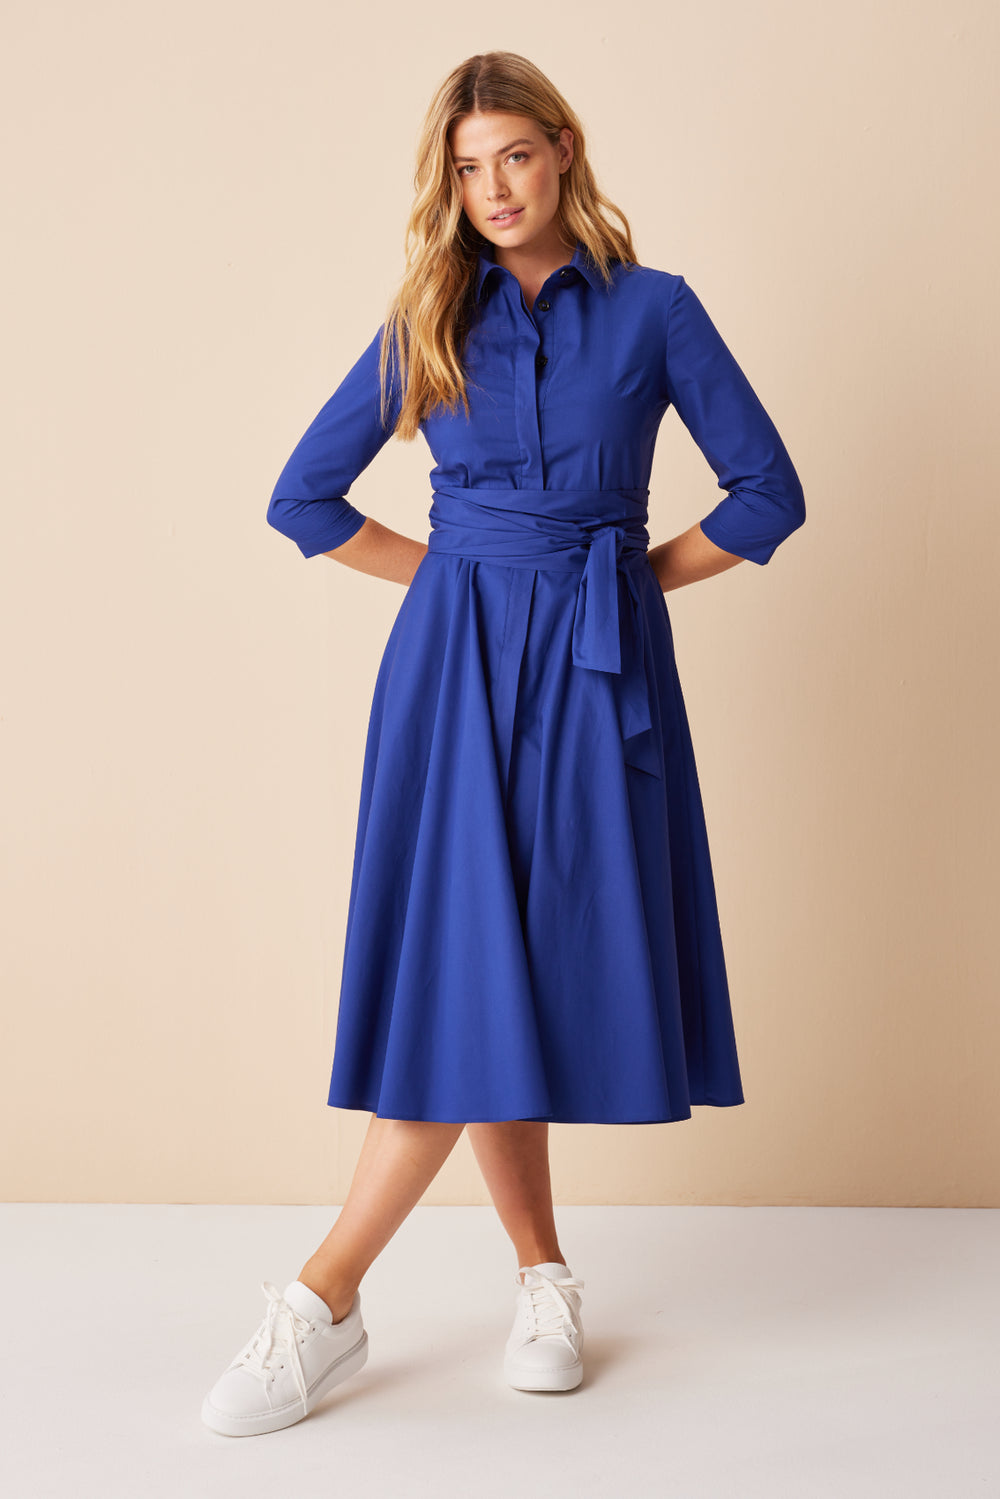 Marianna Déri | royal blue shirt dress in midi length with tie belt | worldwide shipping and high quality garments at asitasahabi.com